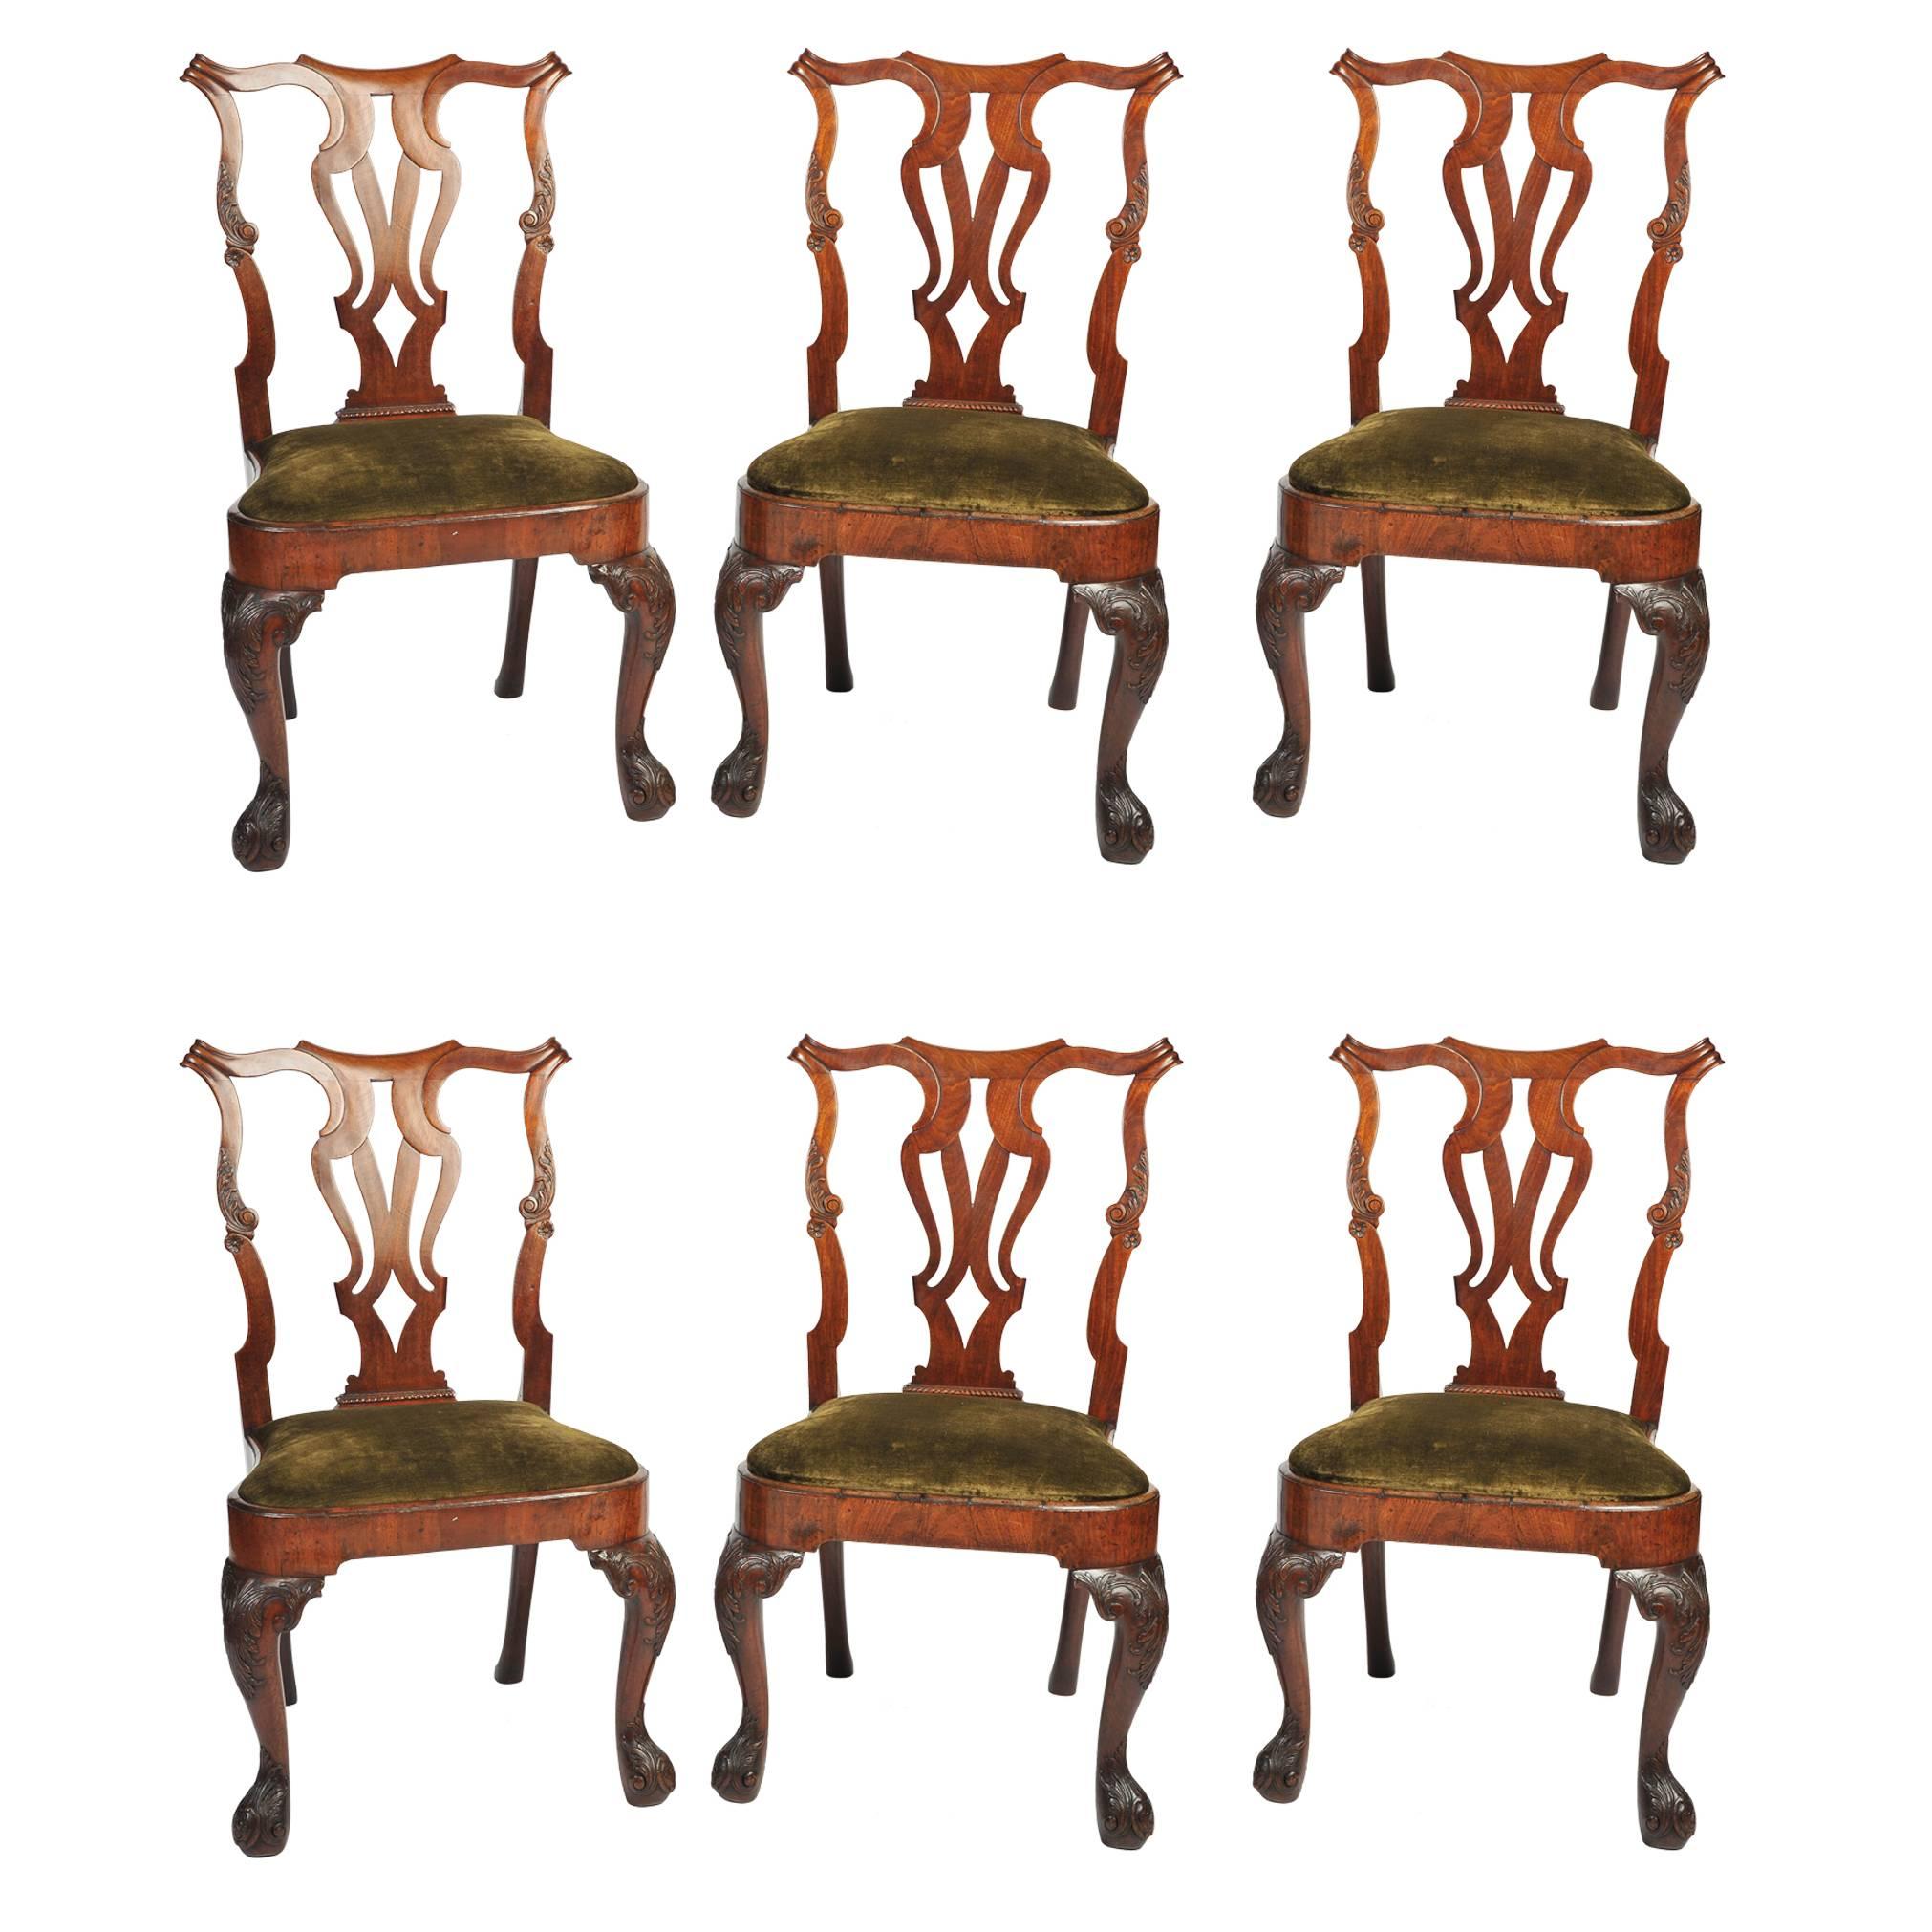 George I Dining Room Chairs